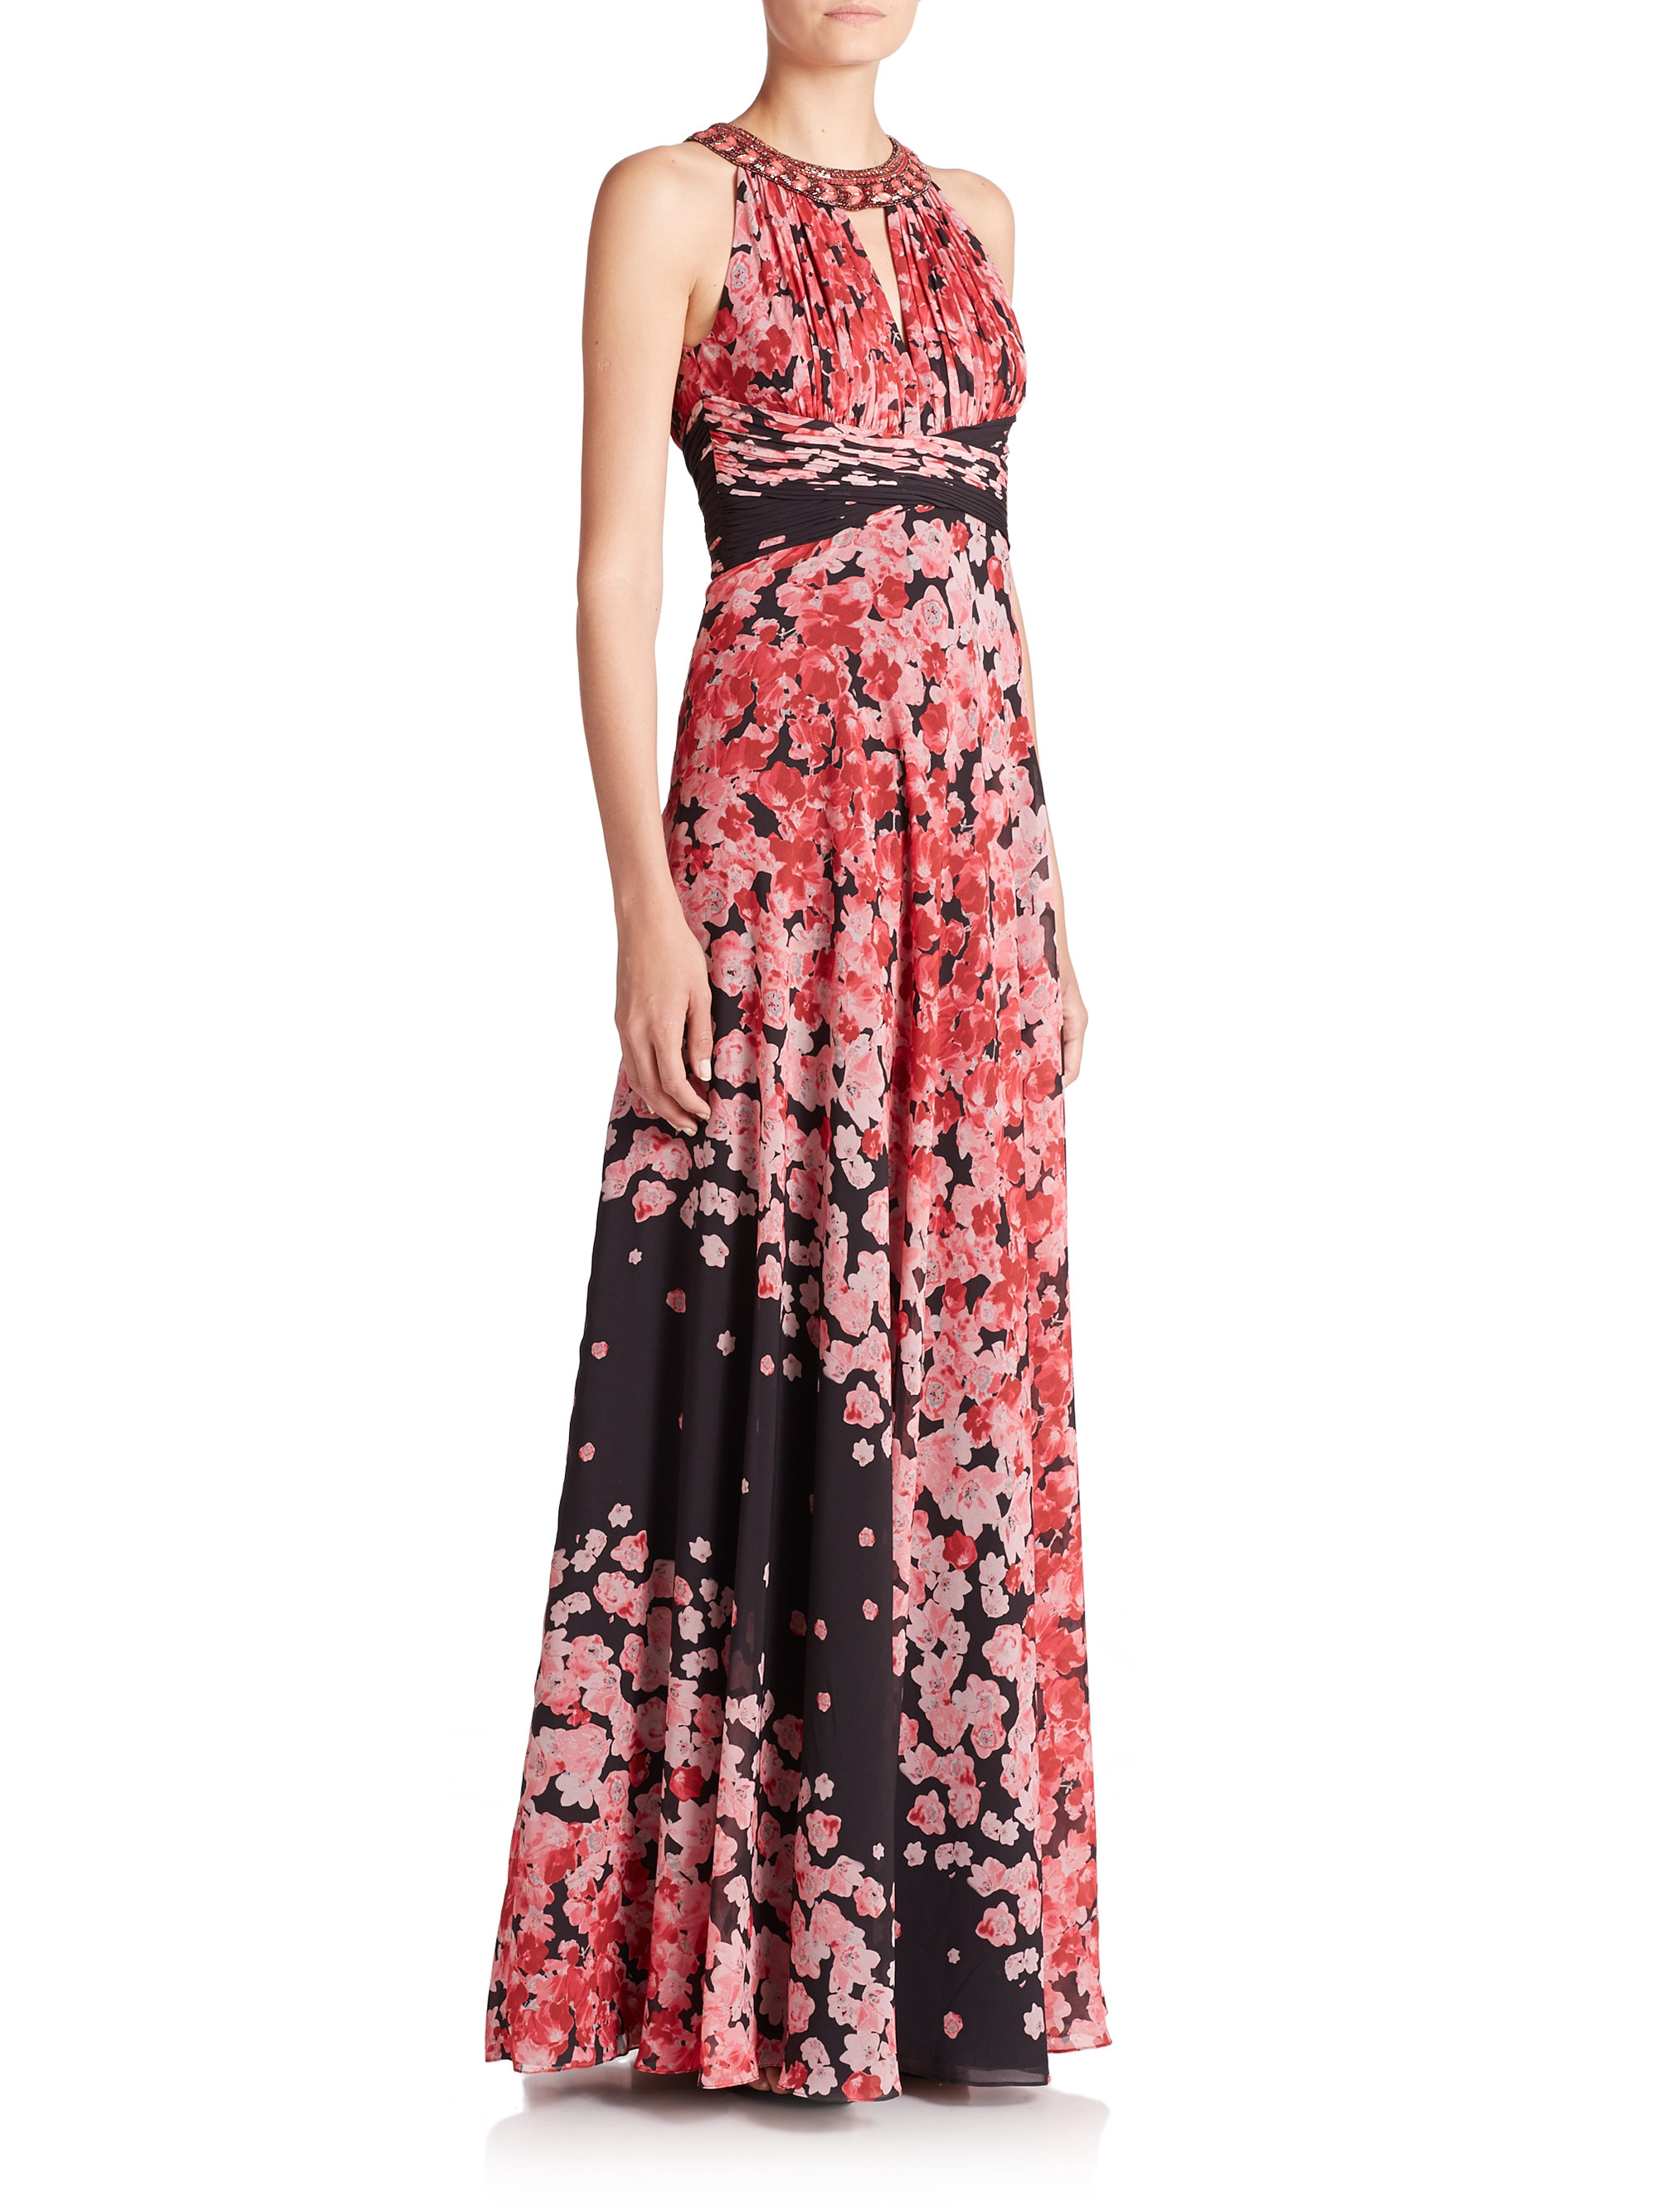 Teri Jon Synthetic Floral Empire Maxi Evening Gown in Red - Lyst